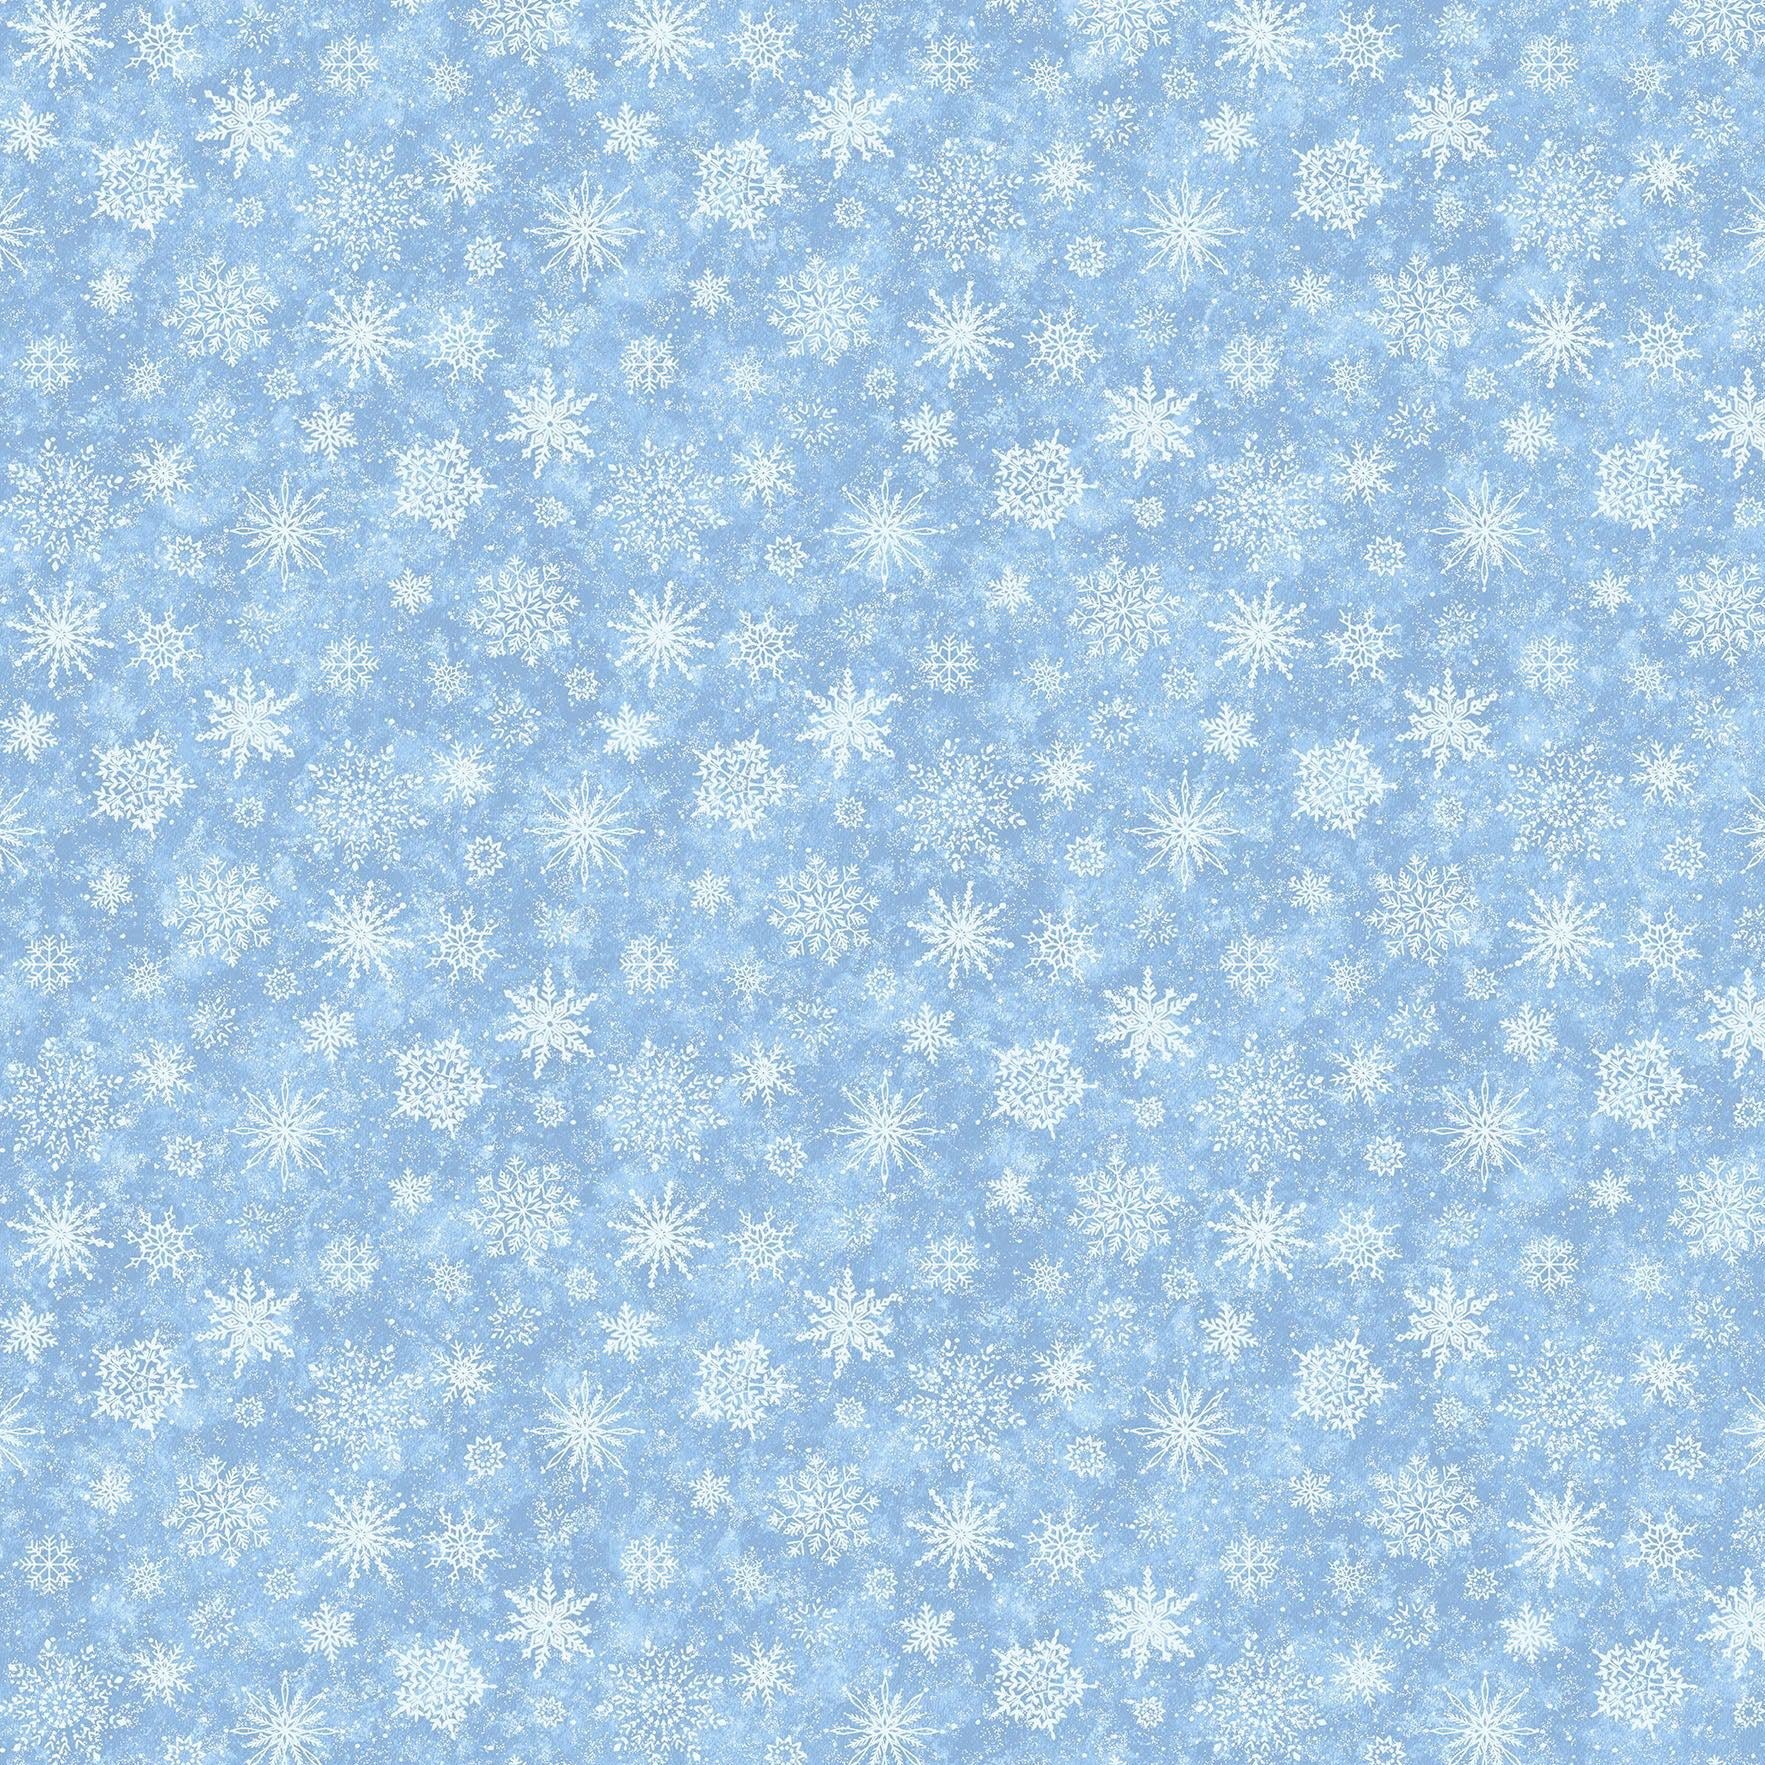 All That Glitters Pale Blue Snowflakes Fabric